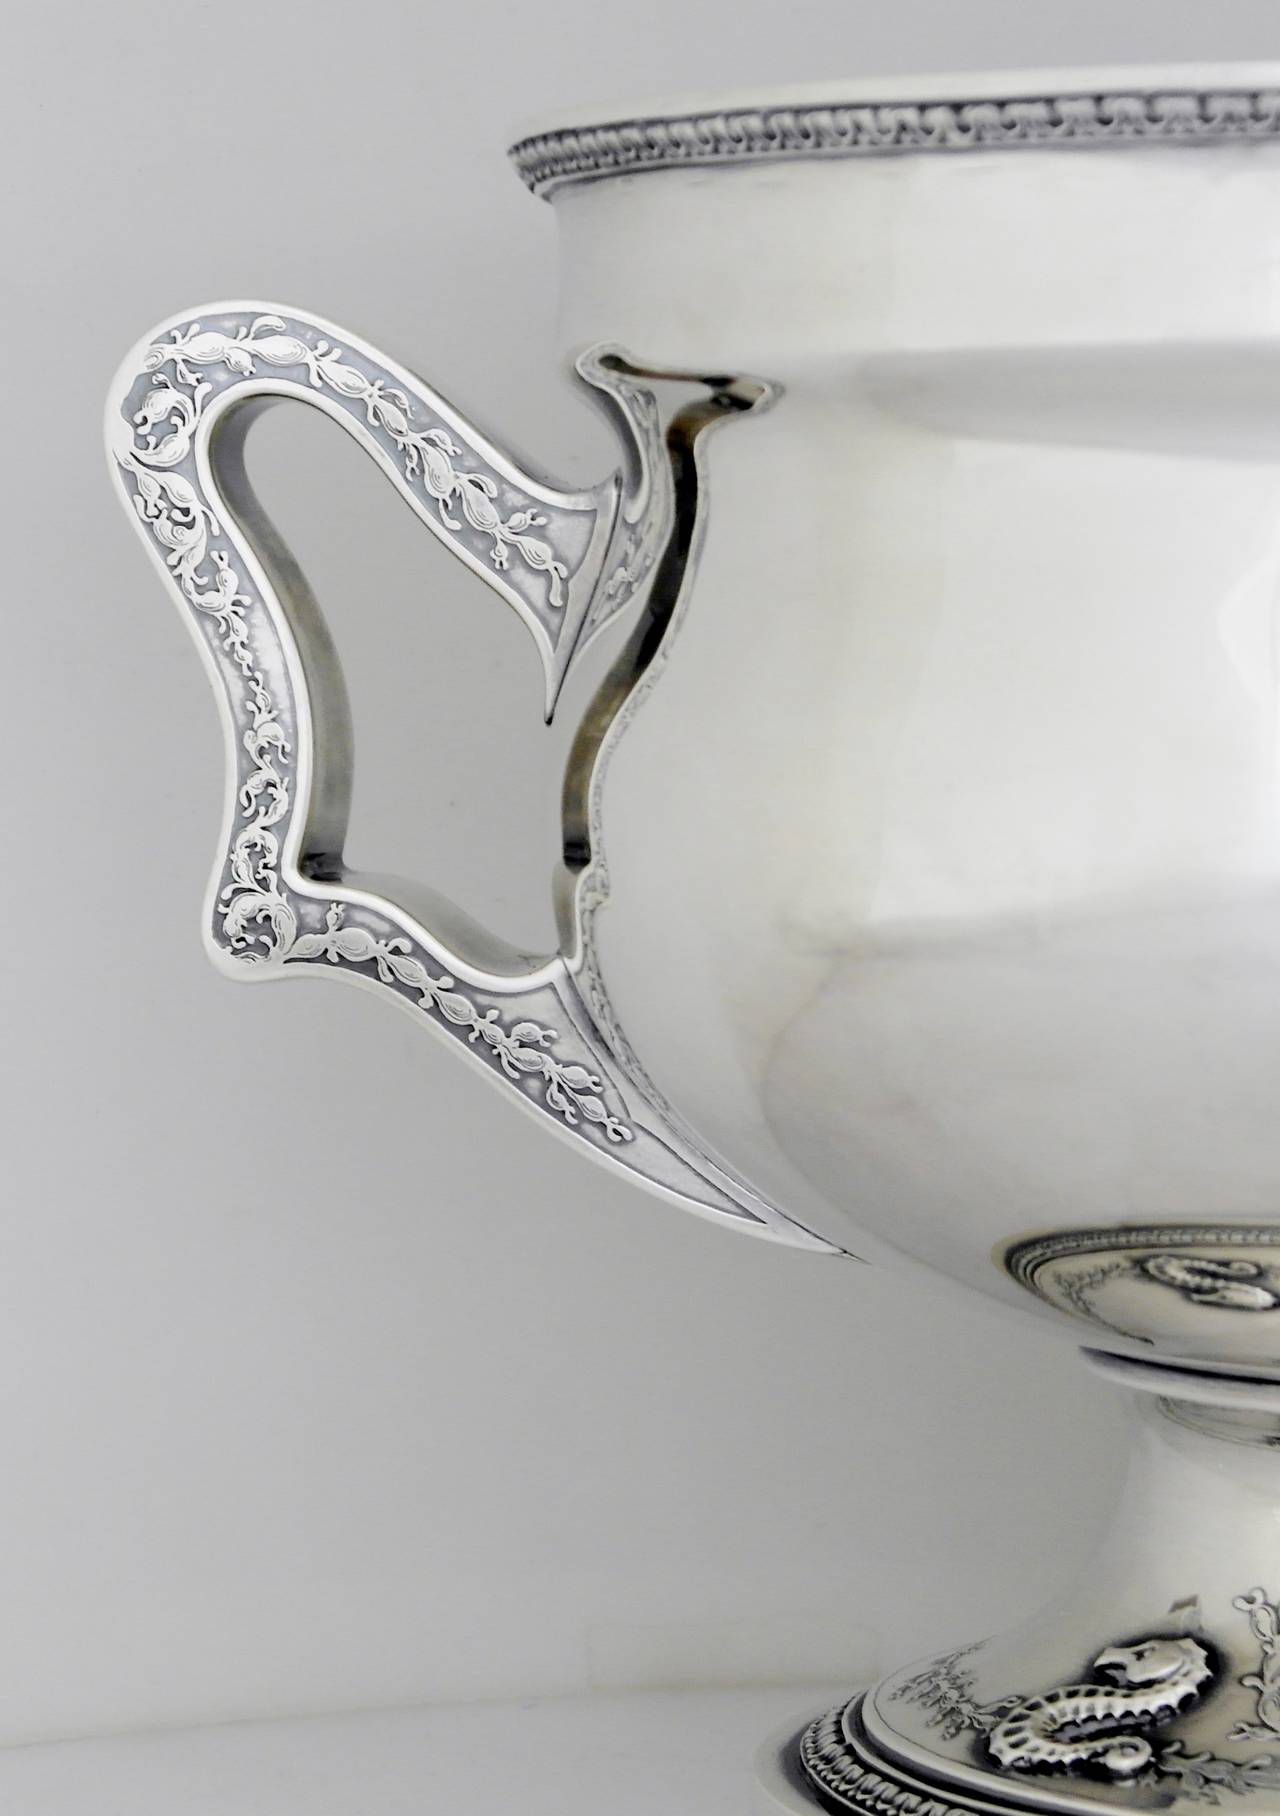 Being offered is a, circa 1912 sterling silver wine bucket by Gorham of Providence, Rhode Island. Comprising a bulbous form bowl with wide engraved handles at opposite ends, pedestal base decorated with four seahorse motifs, floral seaweed